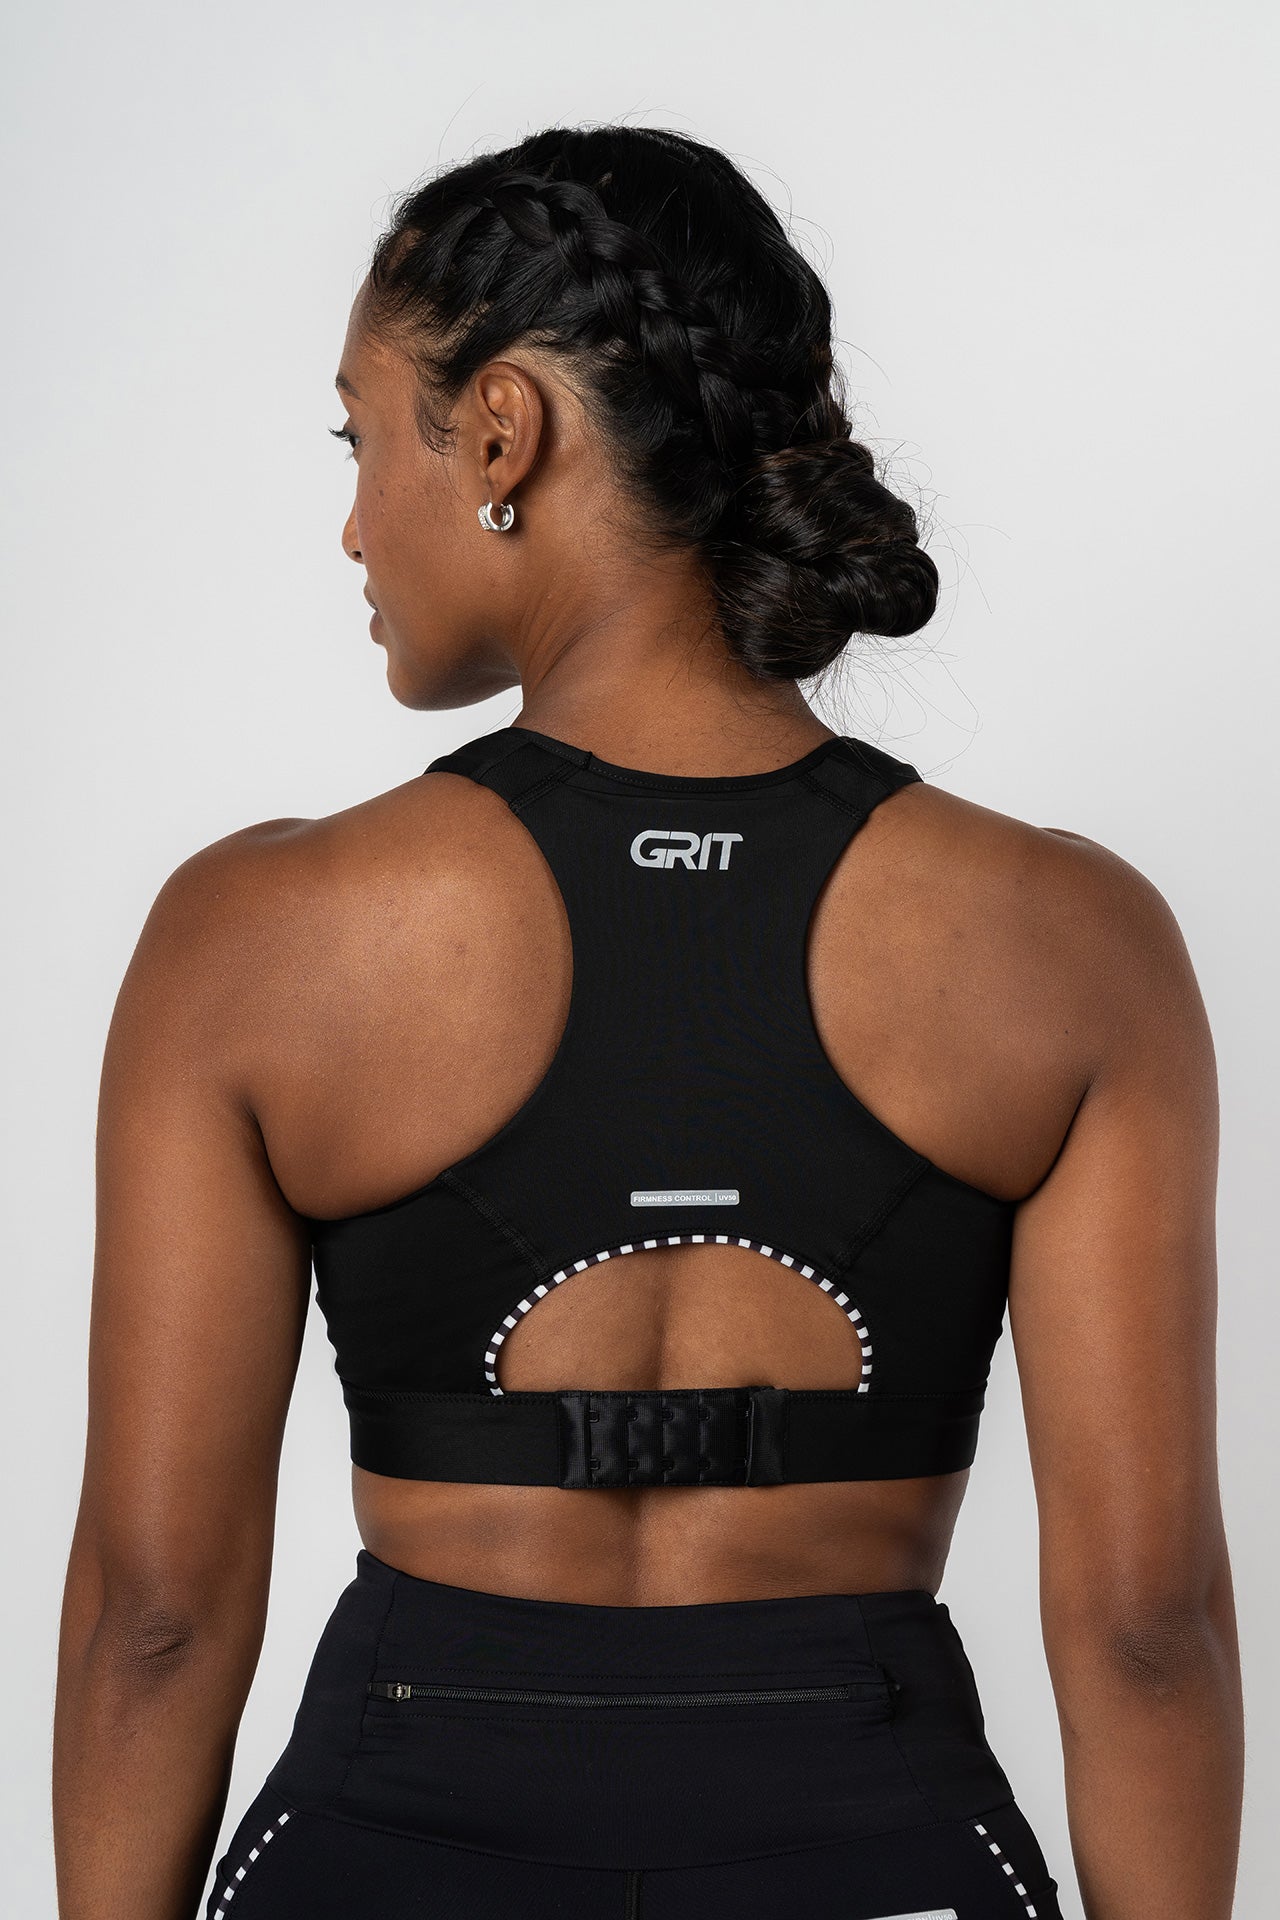 GRIT AND GRIND Women's Sports Bra - Padded